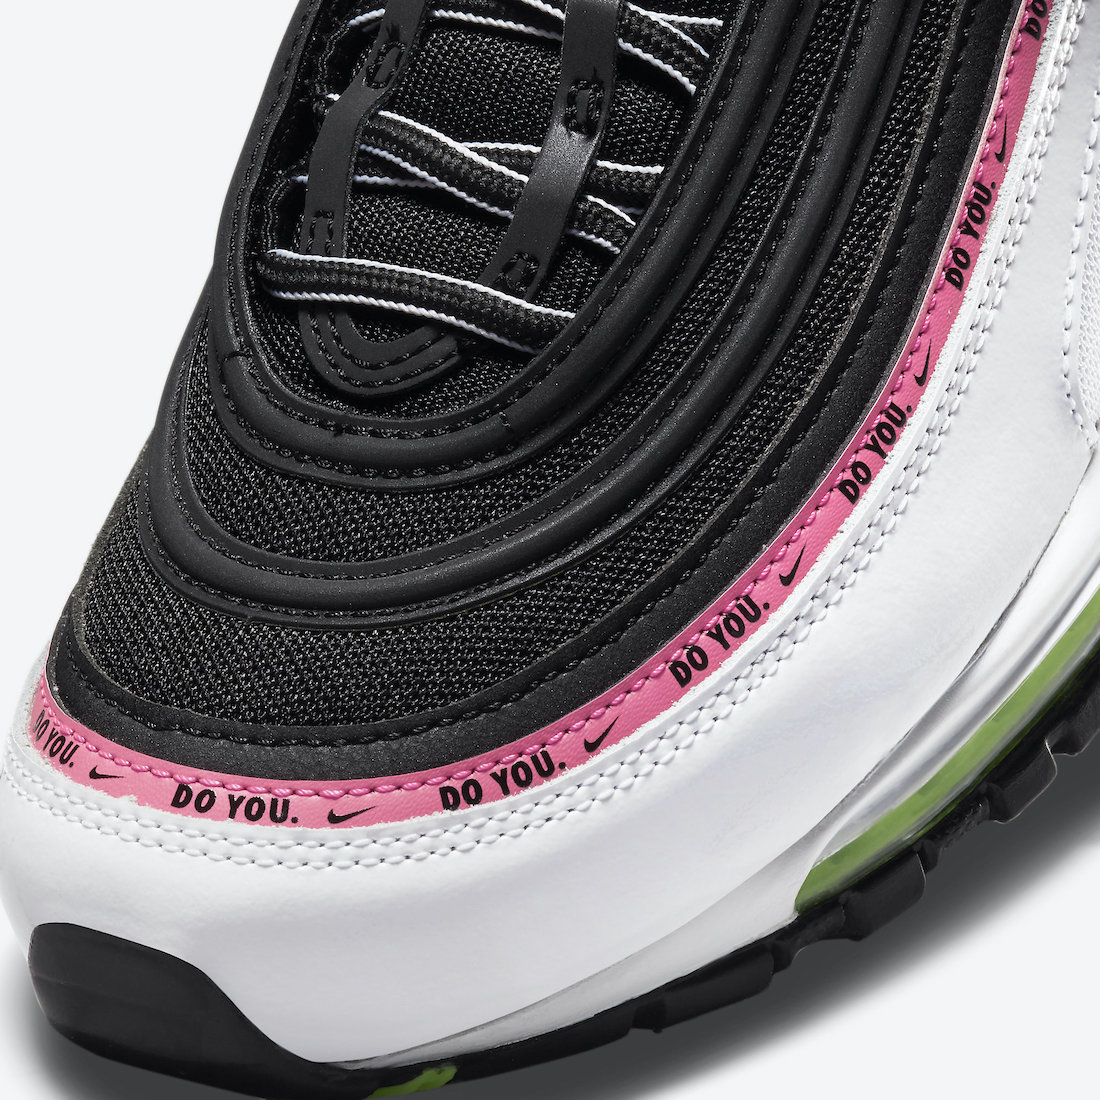 Nike Air Max 97 Do You DM8126-001 Release Date